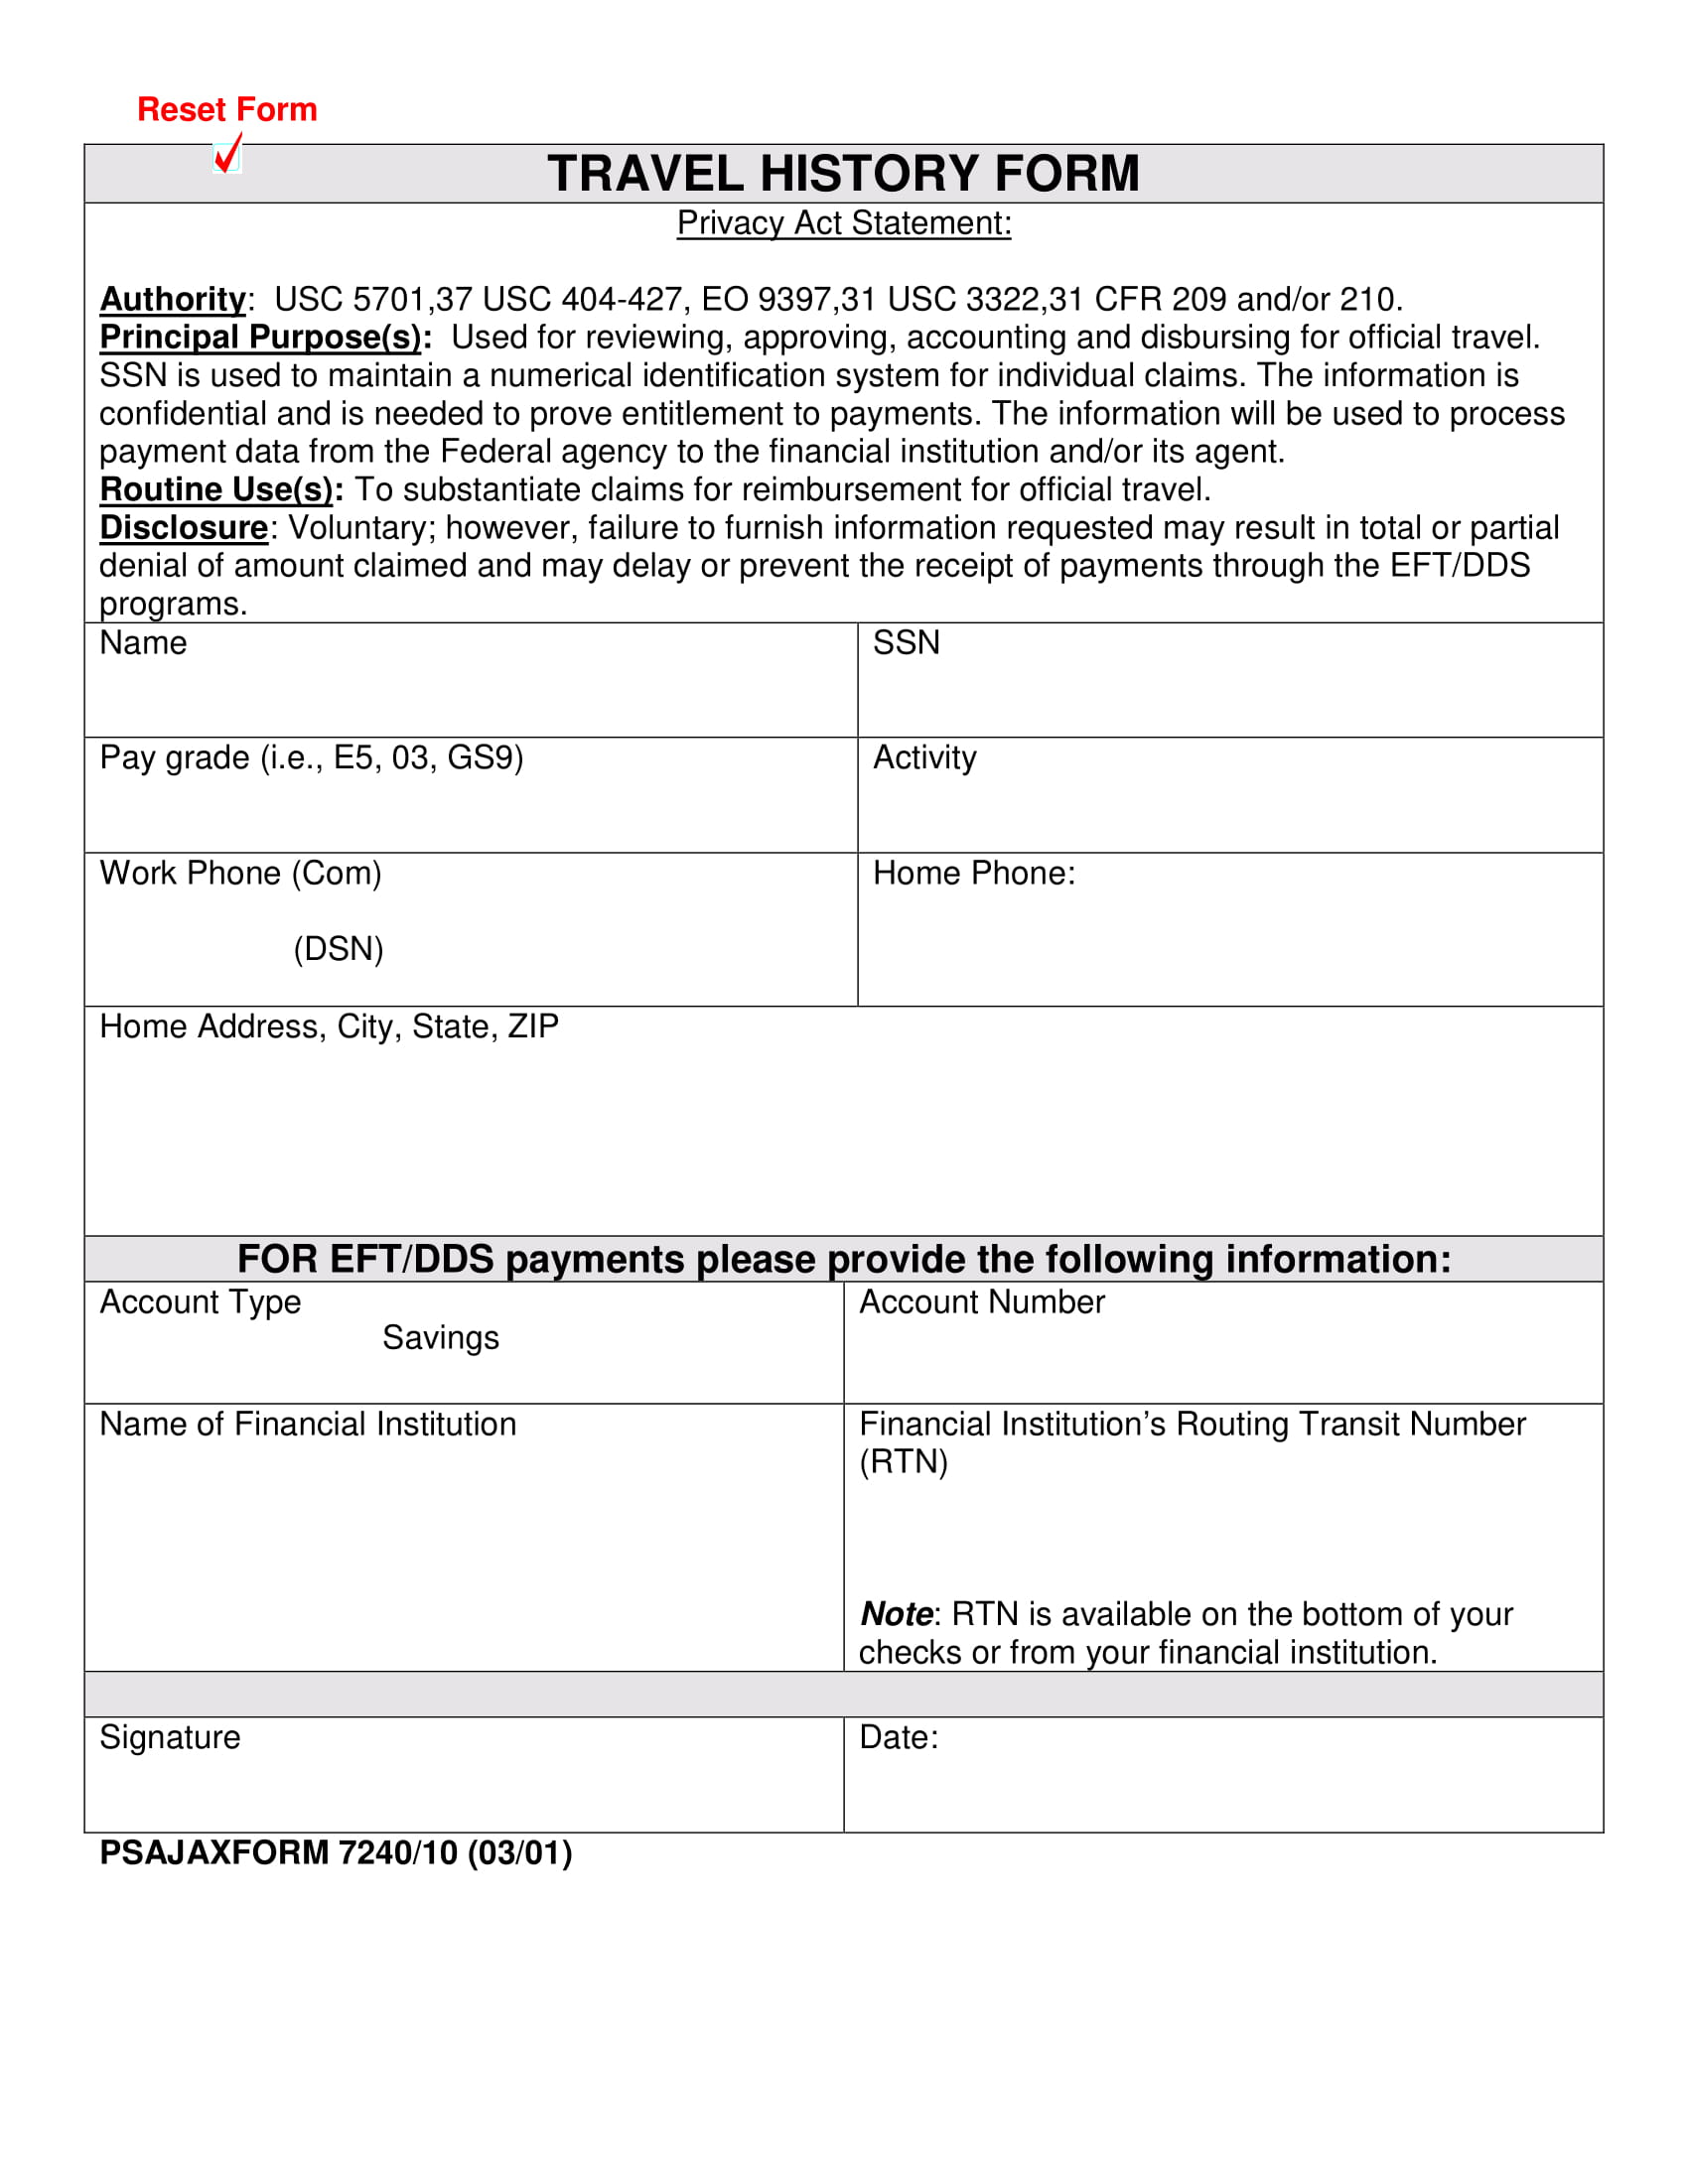 travel history express entry form